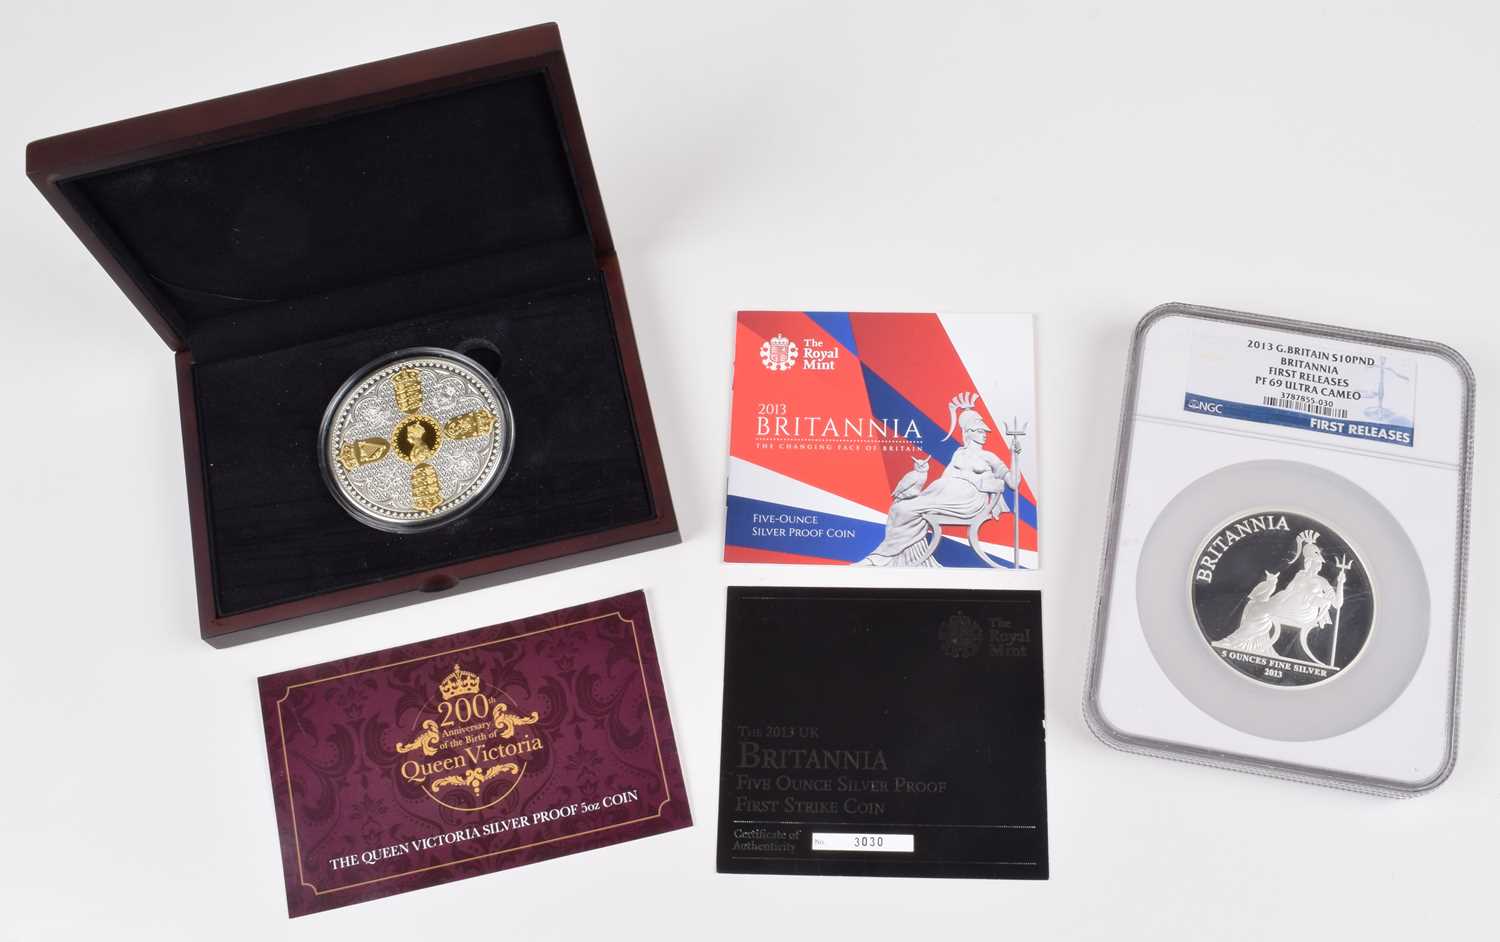 Lot 61 - Queen Victoria Silver Proof 5oz Coin and the 2013 UK Britannia Five Ounce Silver Proof Coin (2).